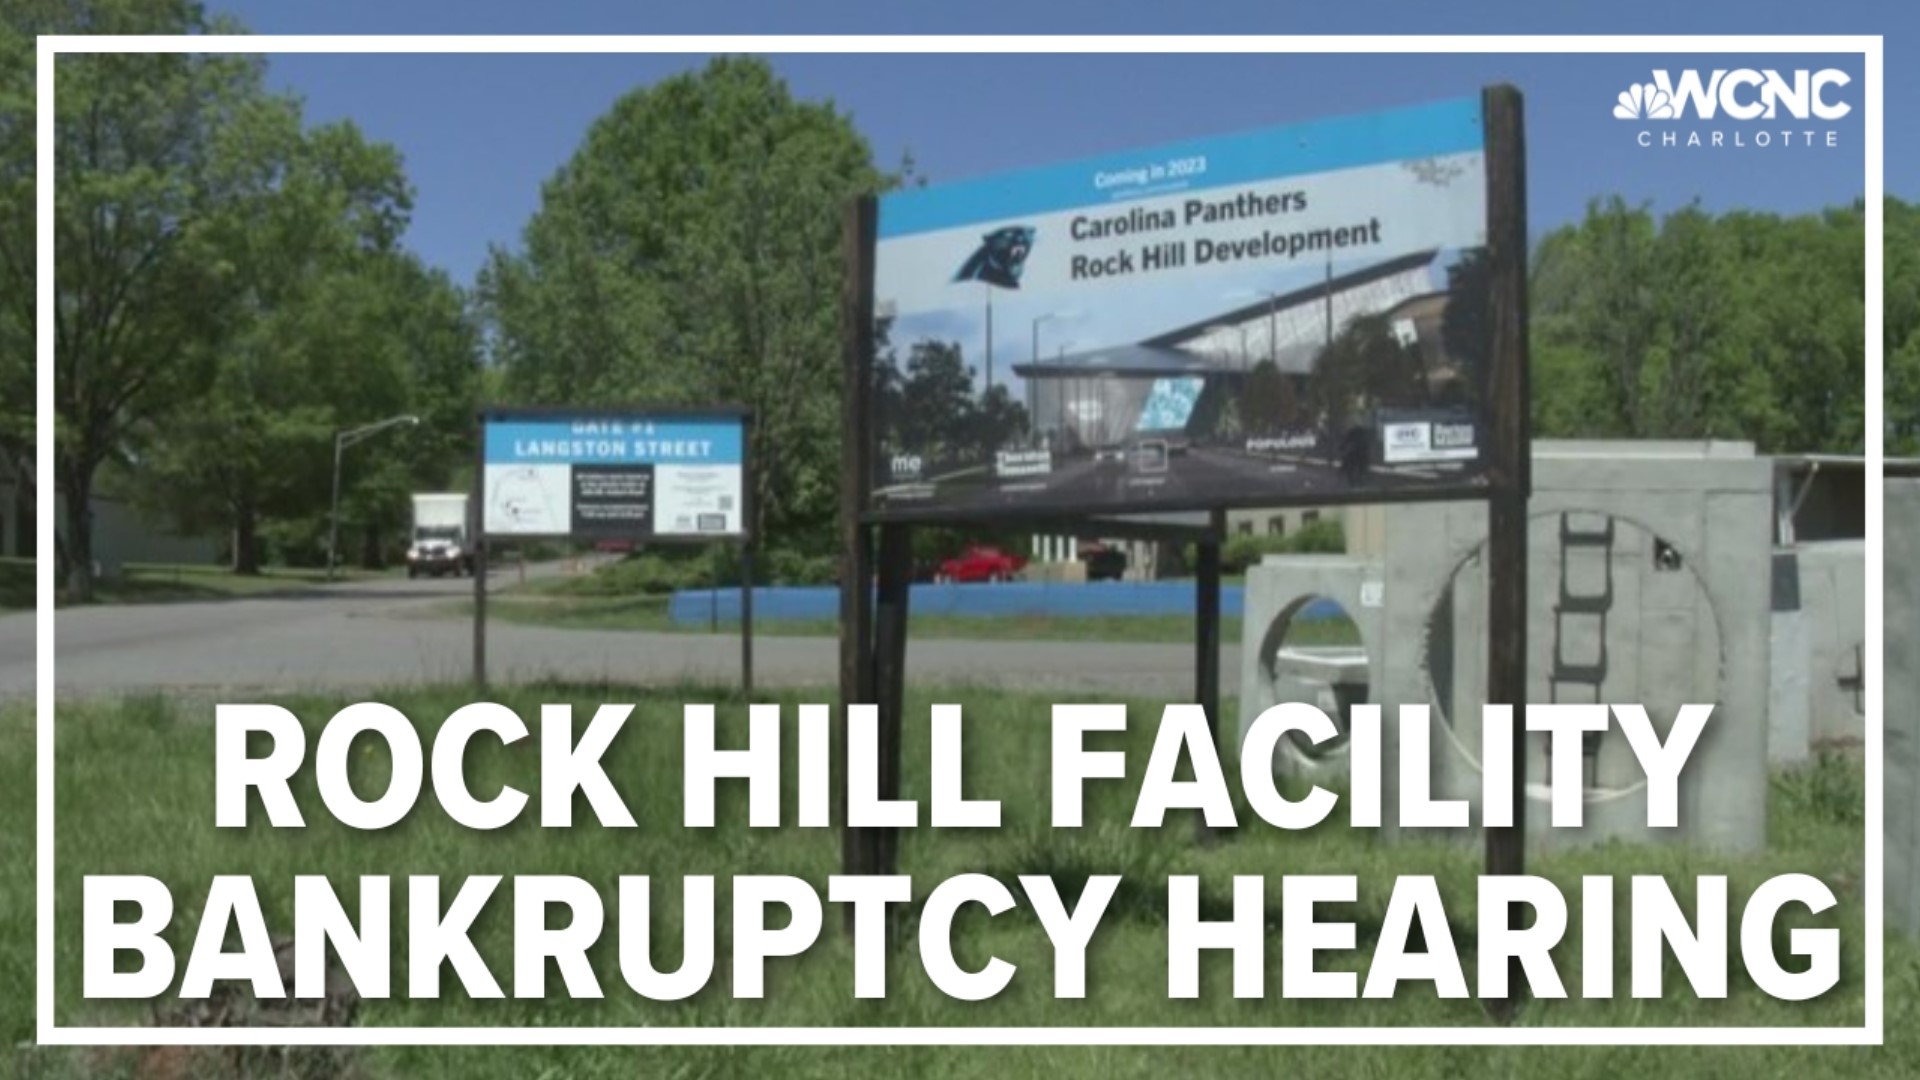 We could see a resolution by year's end in the bankruptcy case over the failed panthers HQ in Rock Hill.